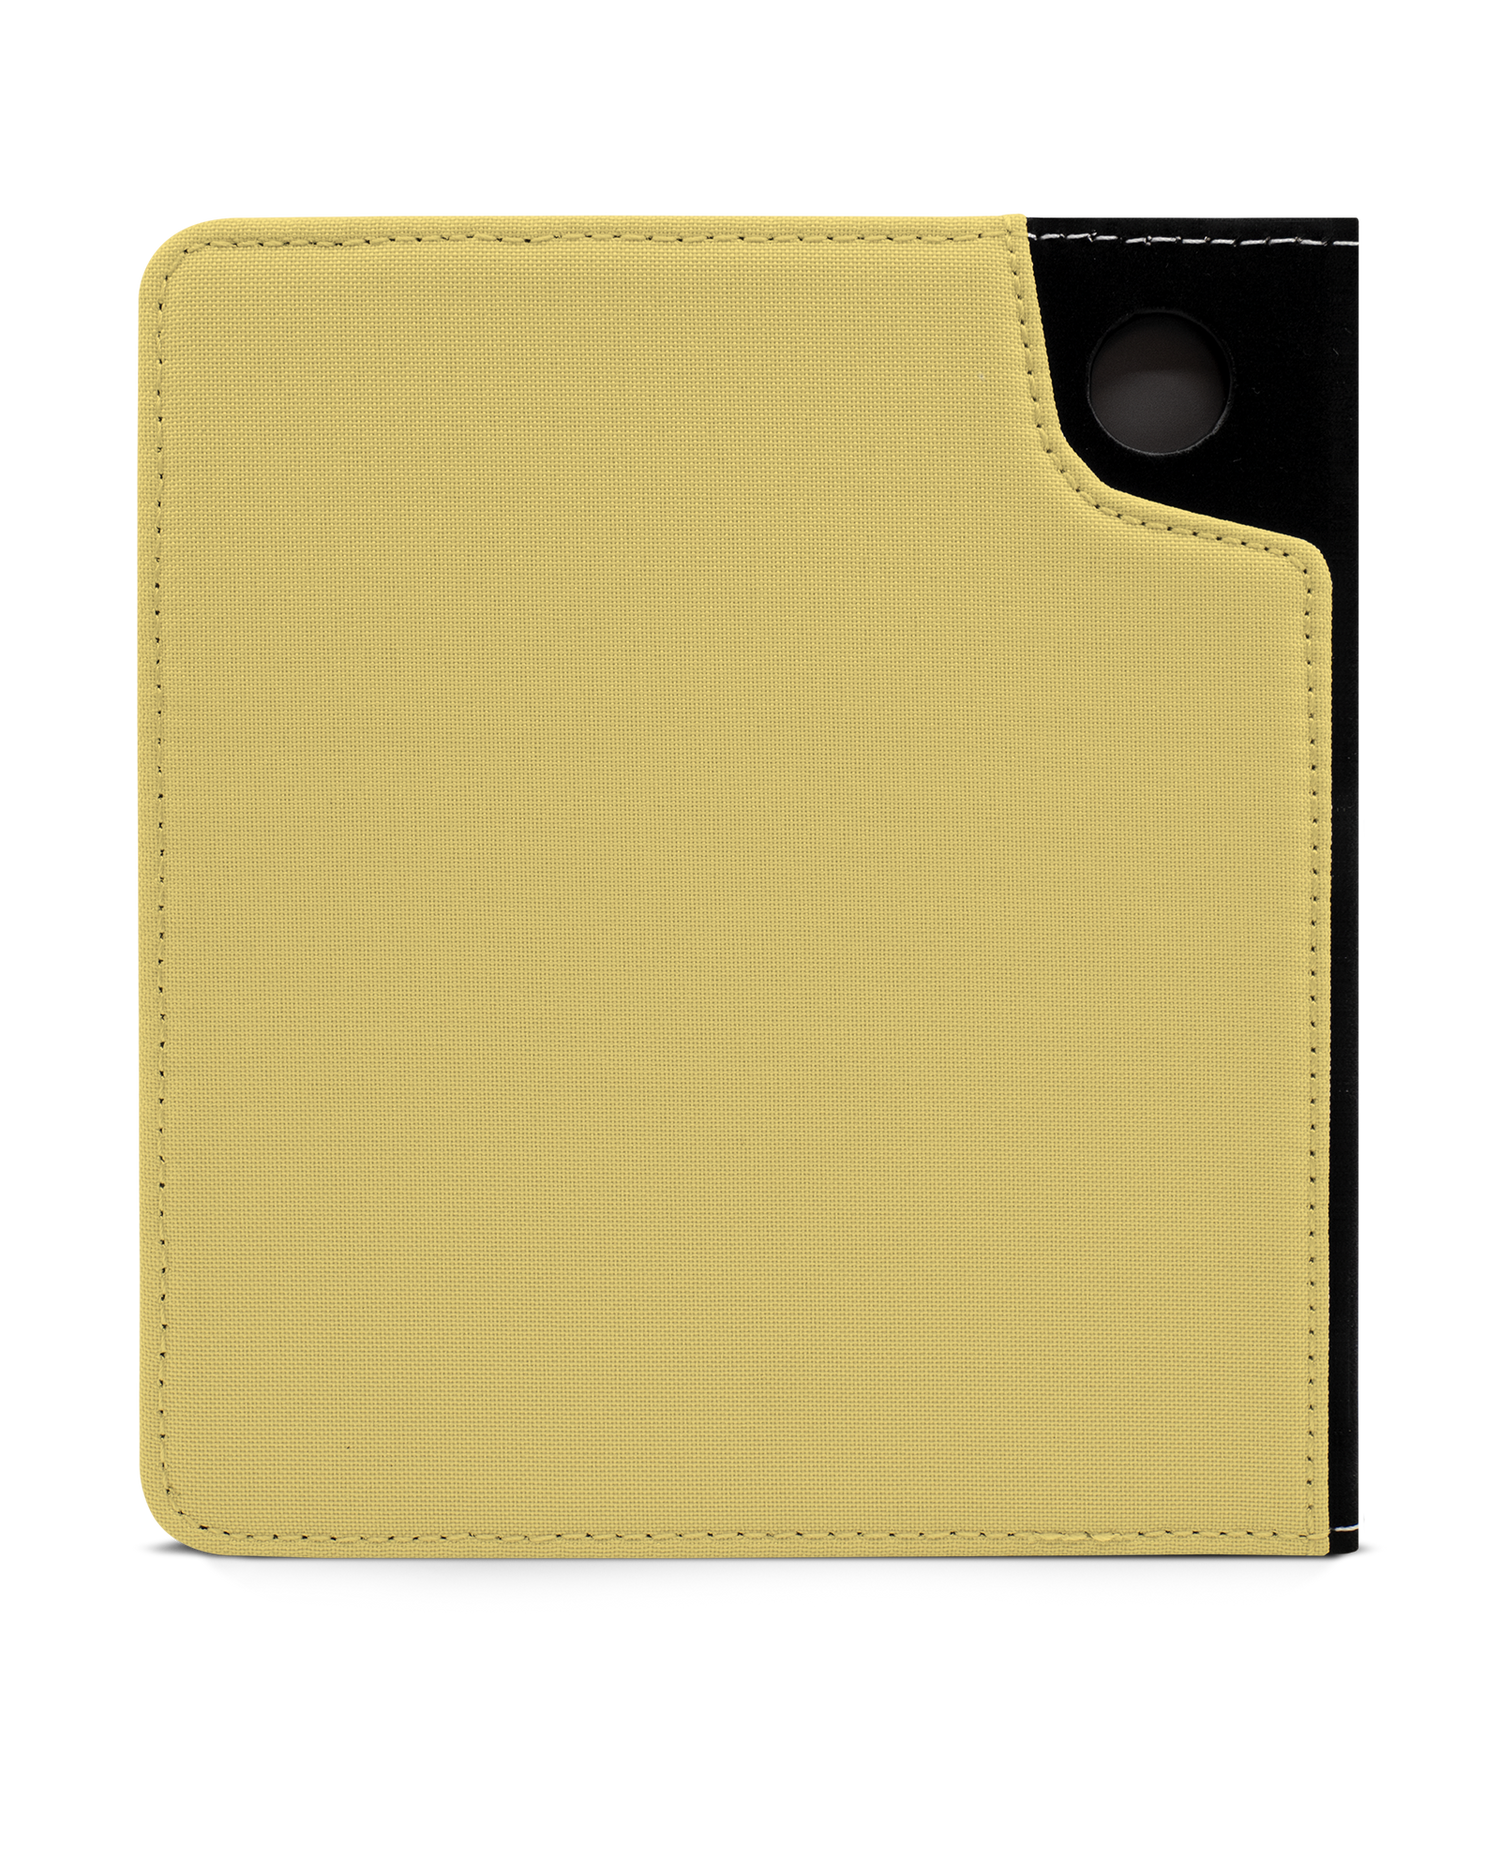 LIGHT YELLOW eReader Case for tolino vision 6: Back View